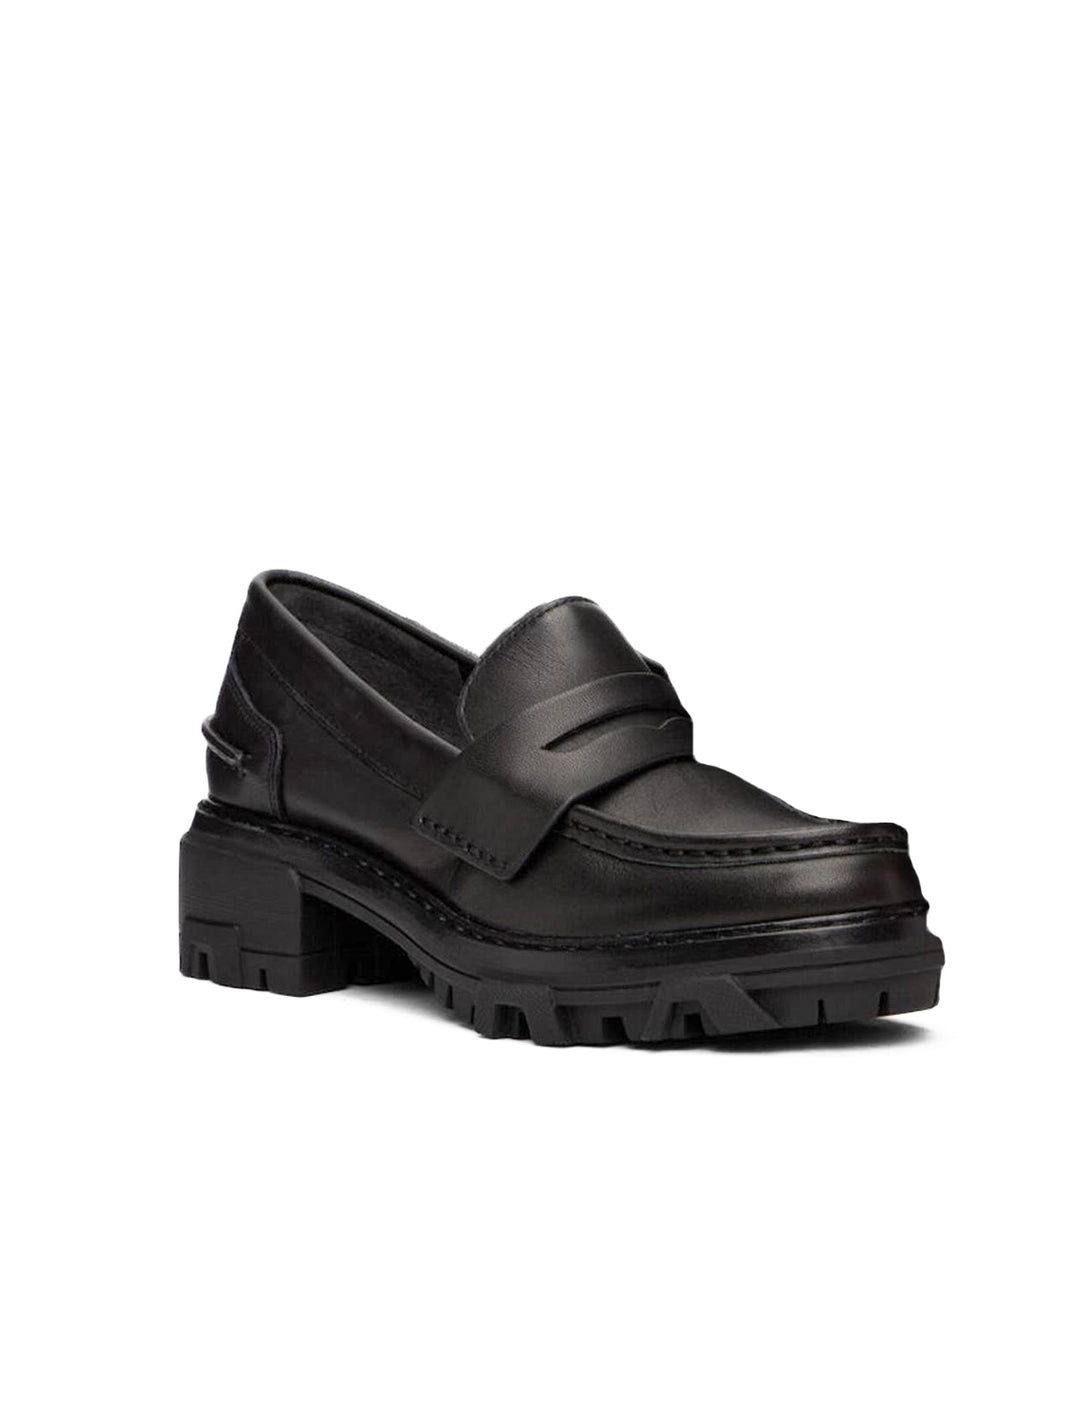 Front angle view of Rag & Bone's shiloh loafer in black.